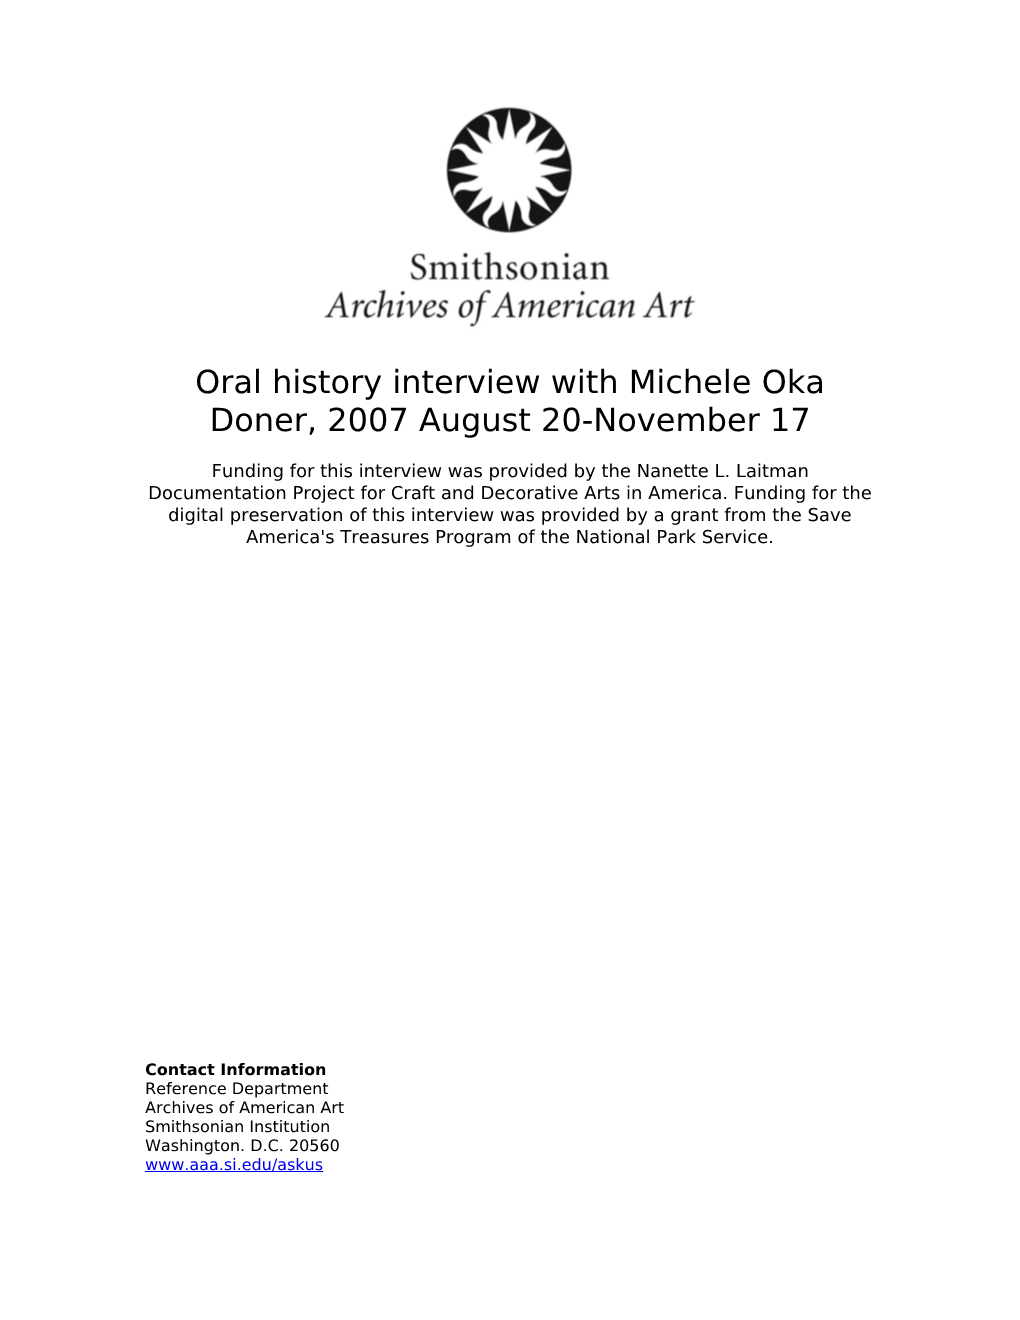 Oral History Interview with Michele Oka Doner, 2007 August 20-November 17